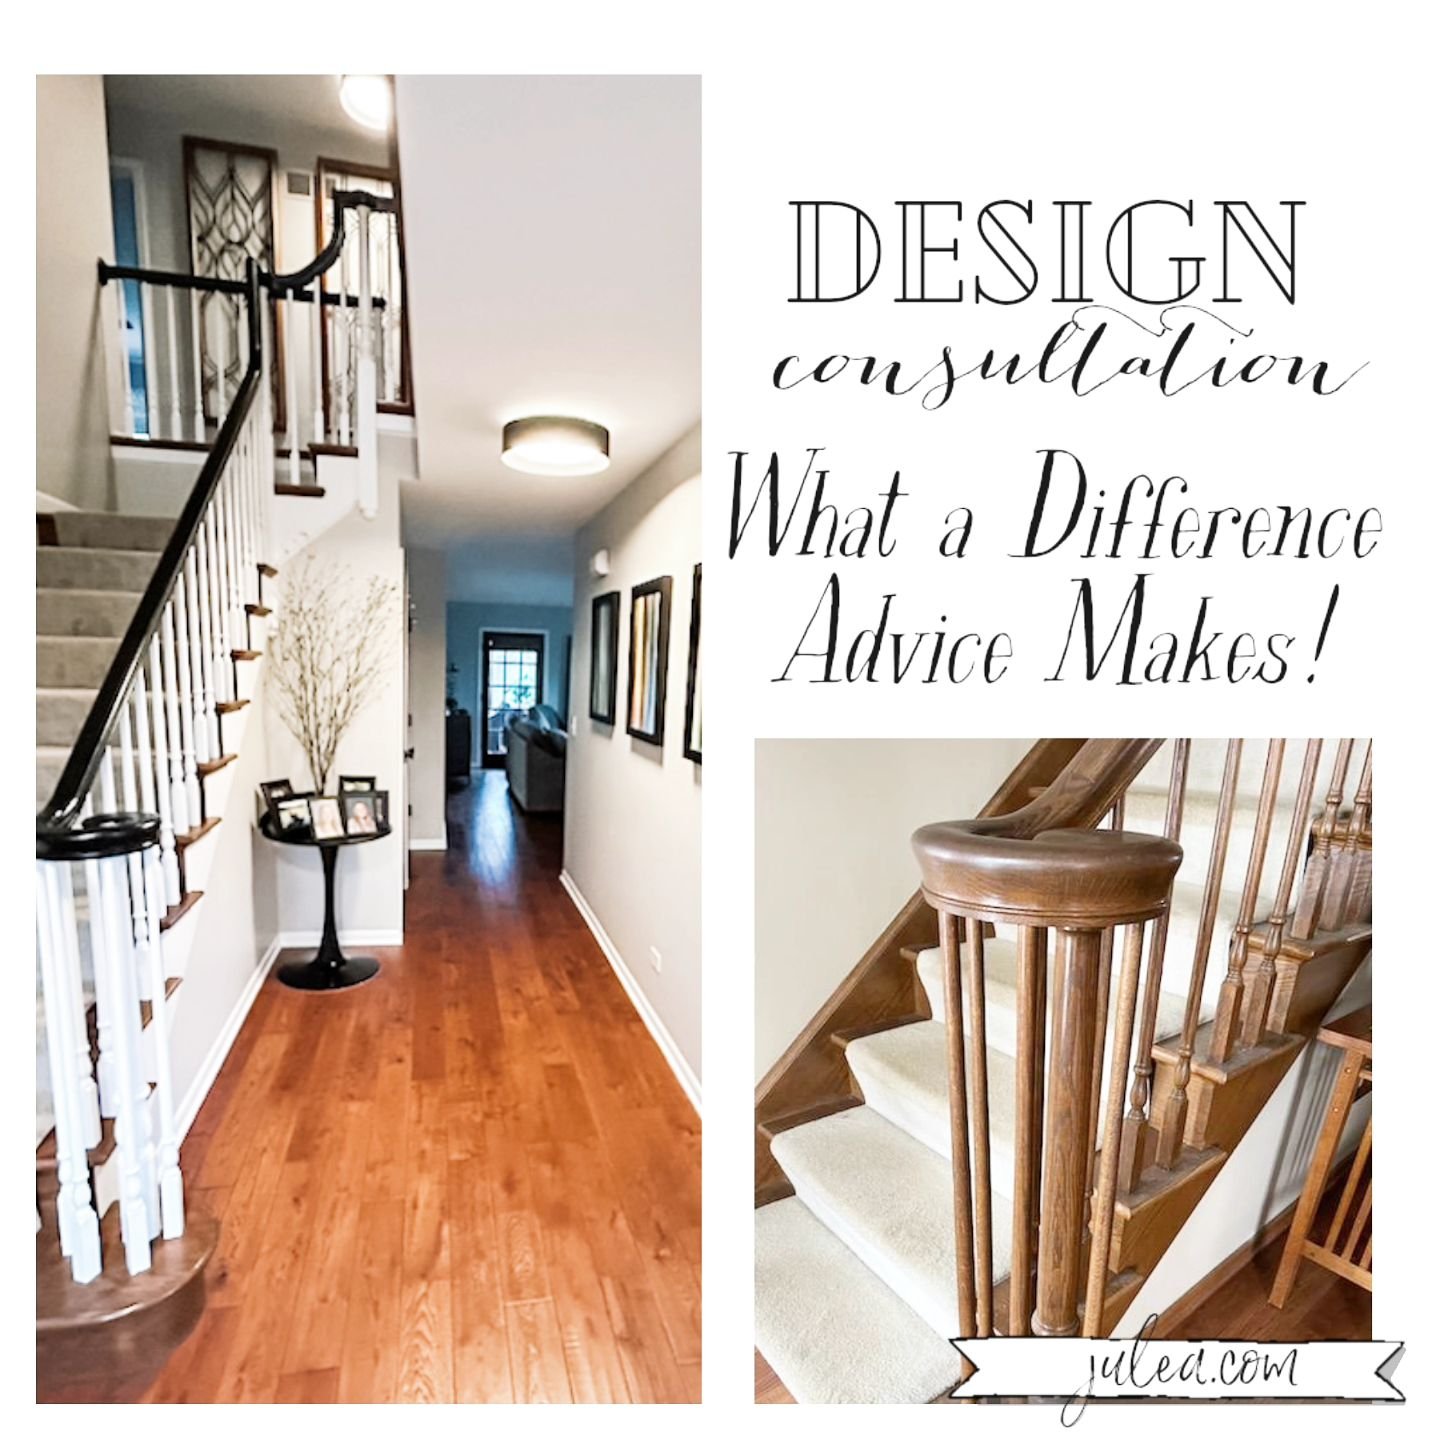 Whether updating, refreshing, or you just don't know - my expert home design consultation is just the advice you need for a beautiful space. In-person or Remote #designconsultant #interiorstylist #interiordesigner #homemakeover #edesigner #decorideas